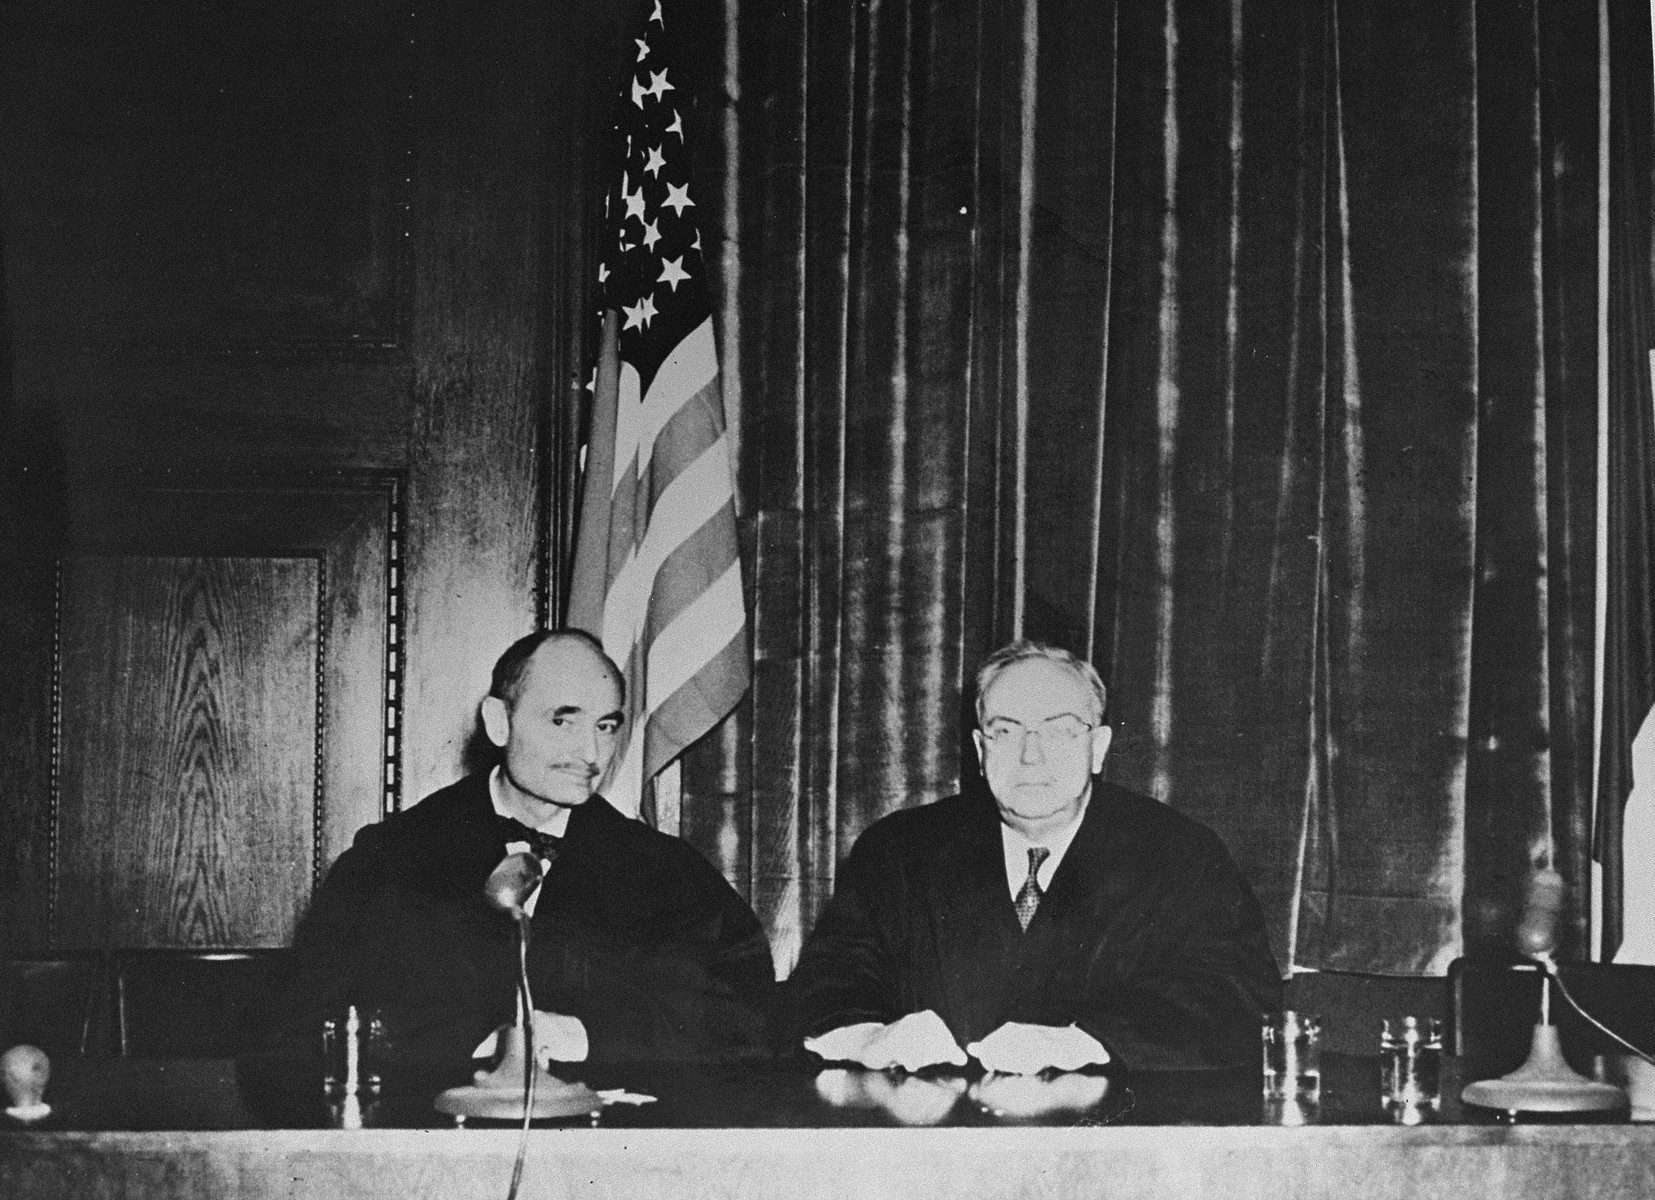 Portrait of the two American judges on the International Military Tribunal in Nuremberg.

Pictured at the left is Francis Biddle and, at the right, John J. Parker.